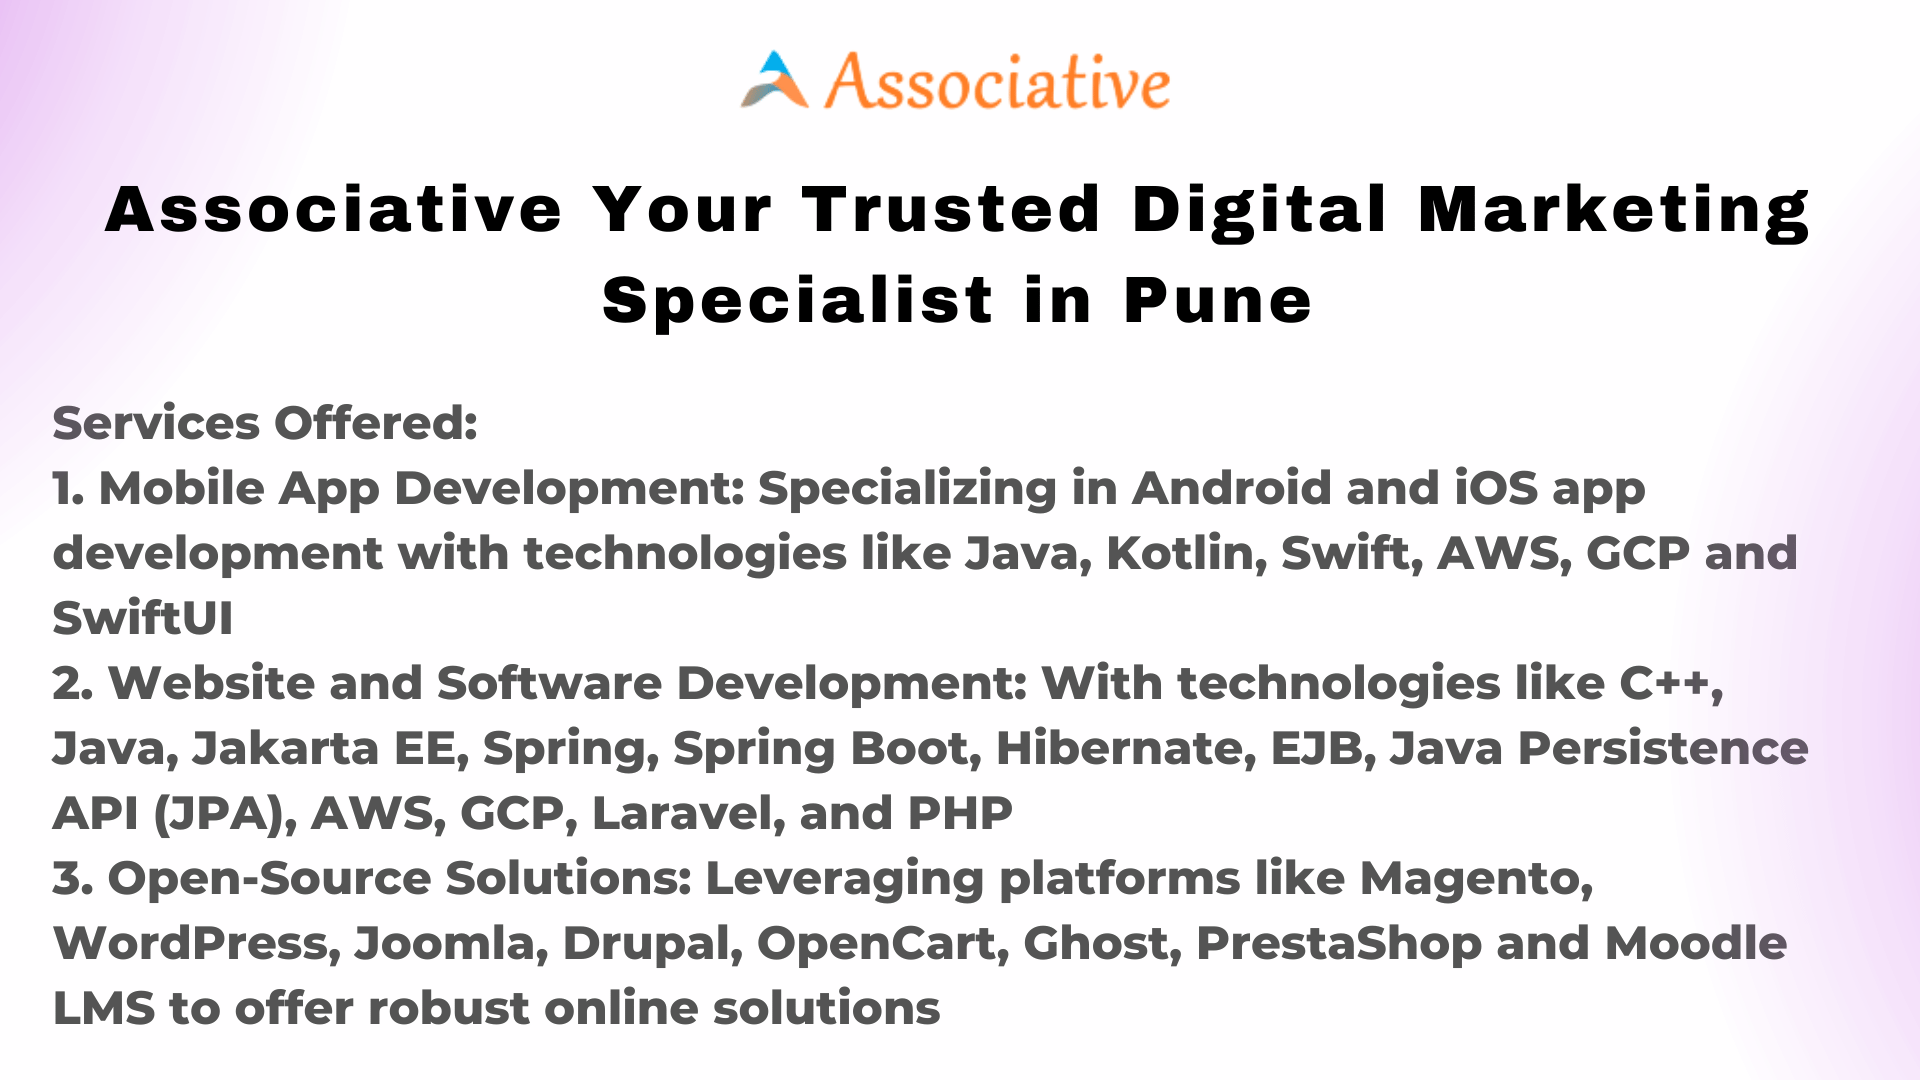 Associative Your Trusted Digital Marketing Specialist in Pune